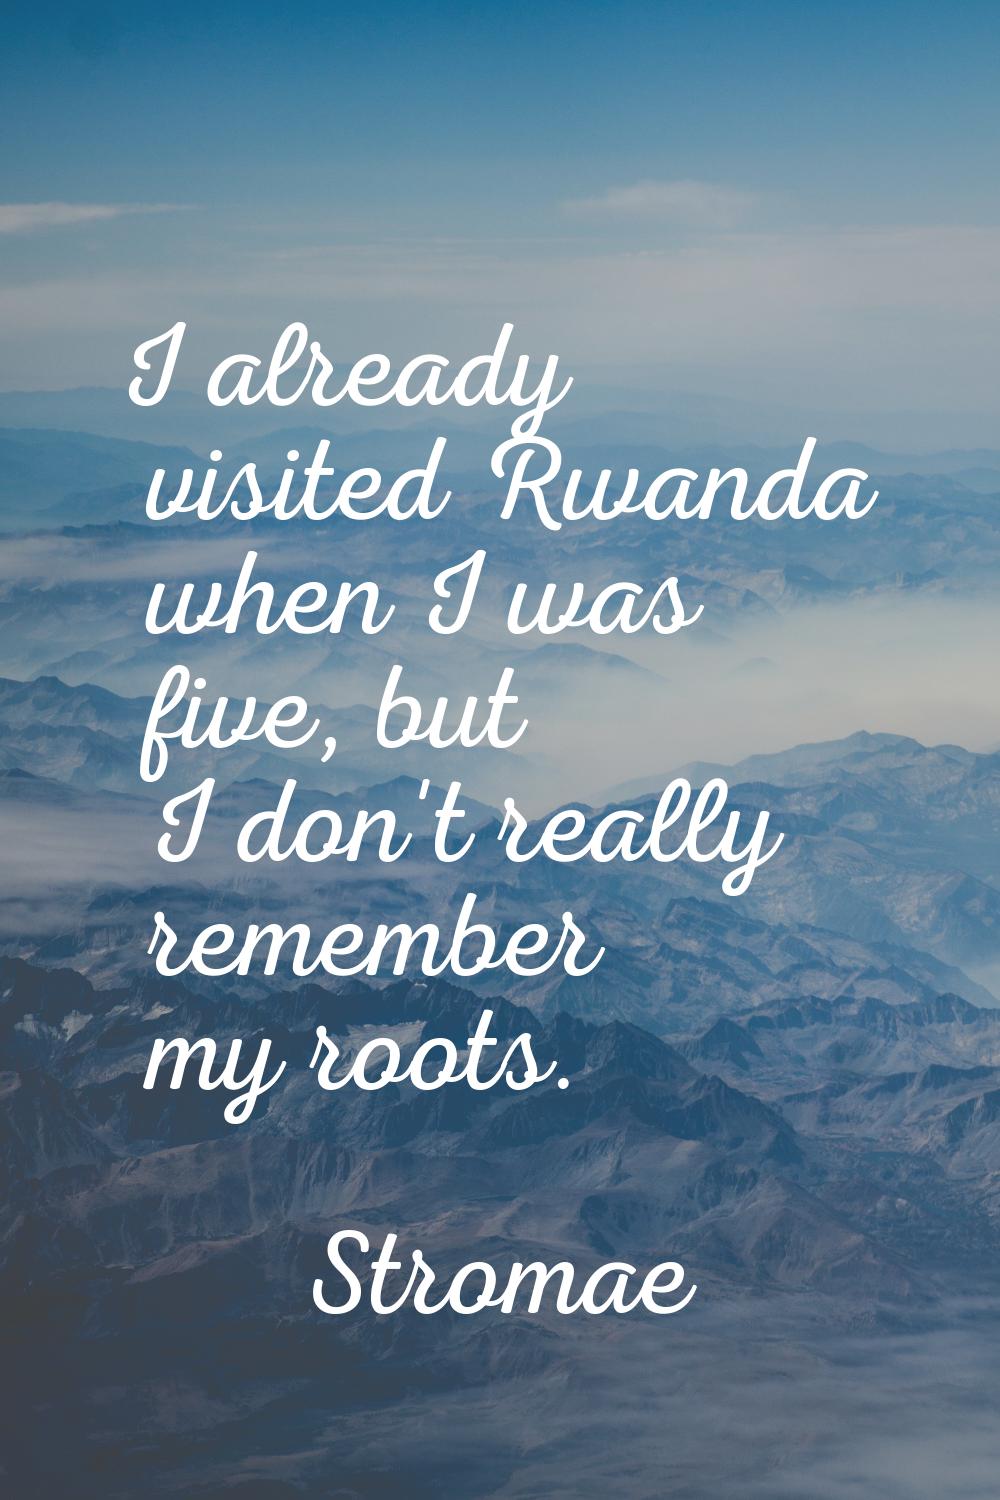 I already visited Rwanda when I was five, but I don't really remember my roots.